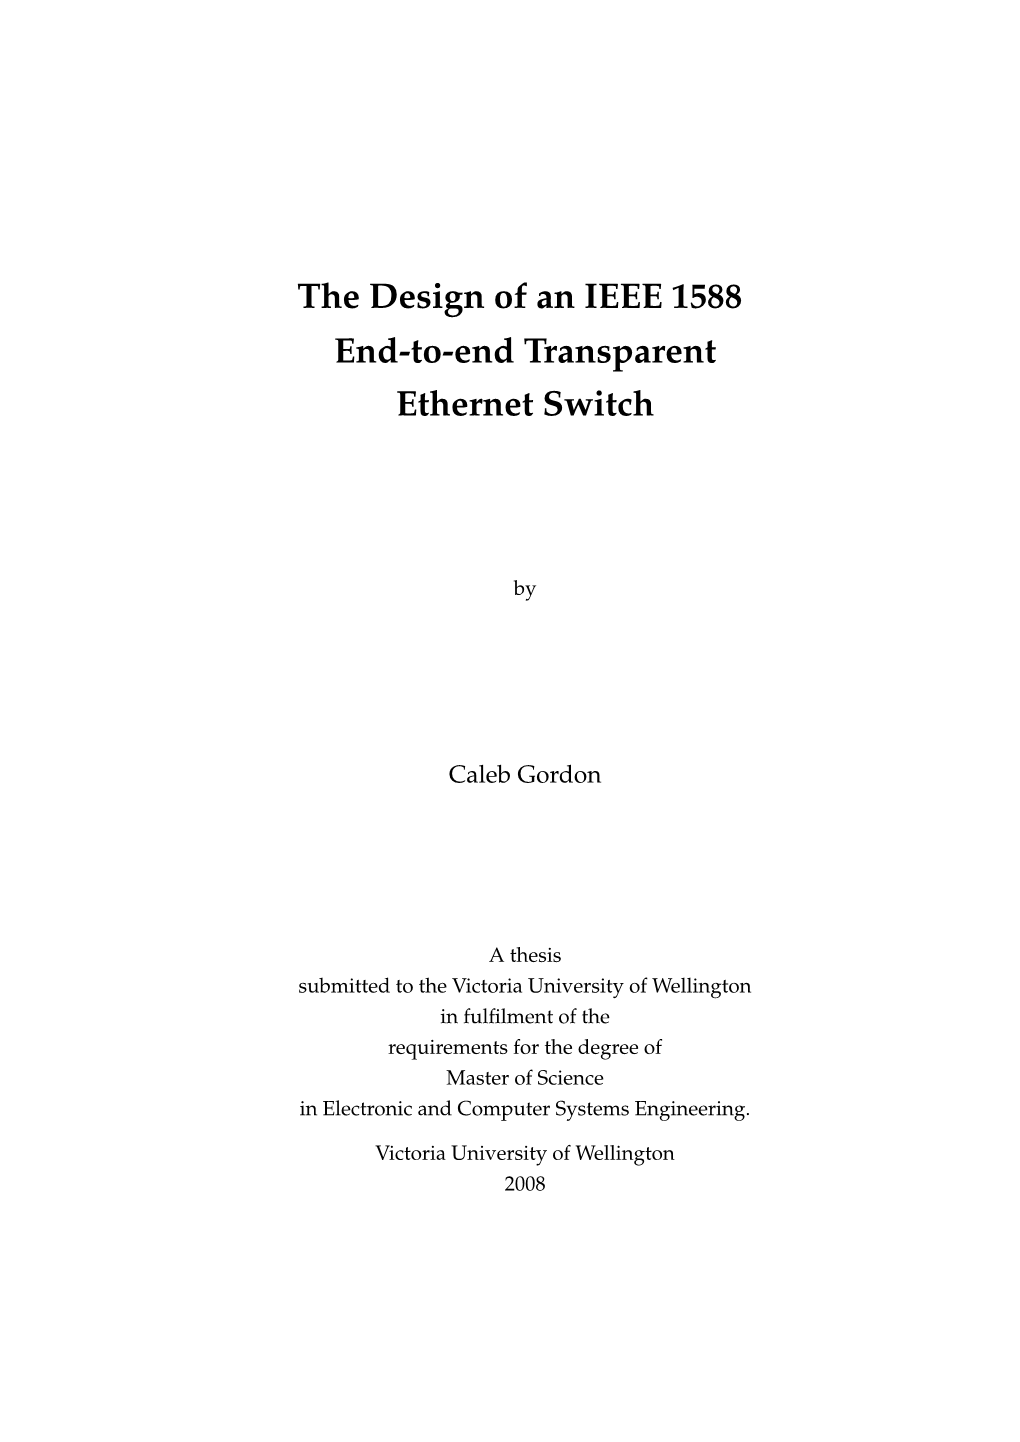 The Design of an IEEE 1588 End-To-End Transparent Ethernet Switch